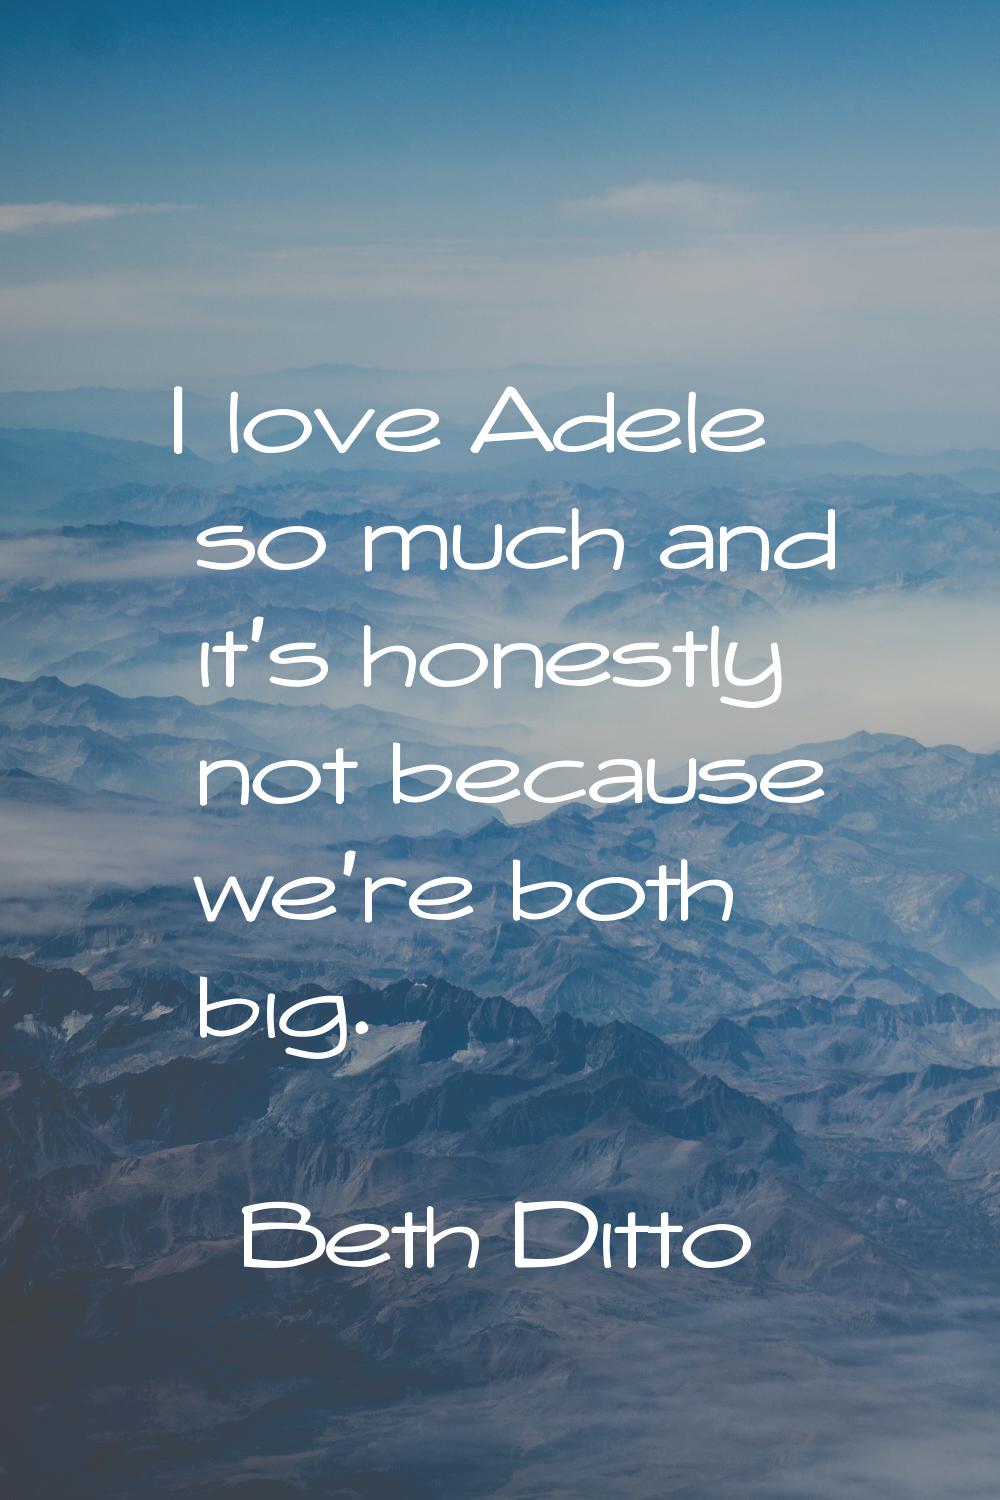 I love Adele so much and it's honestly not because we're both big.